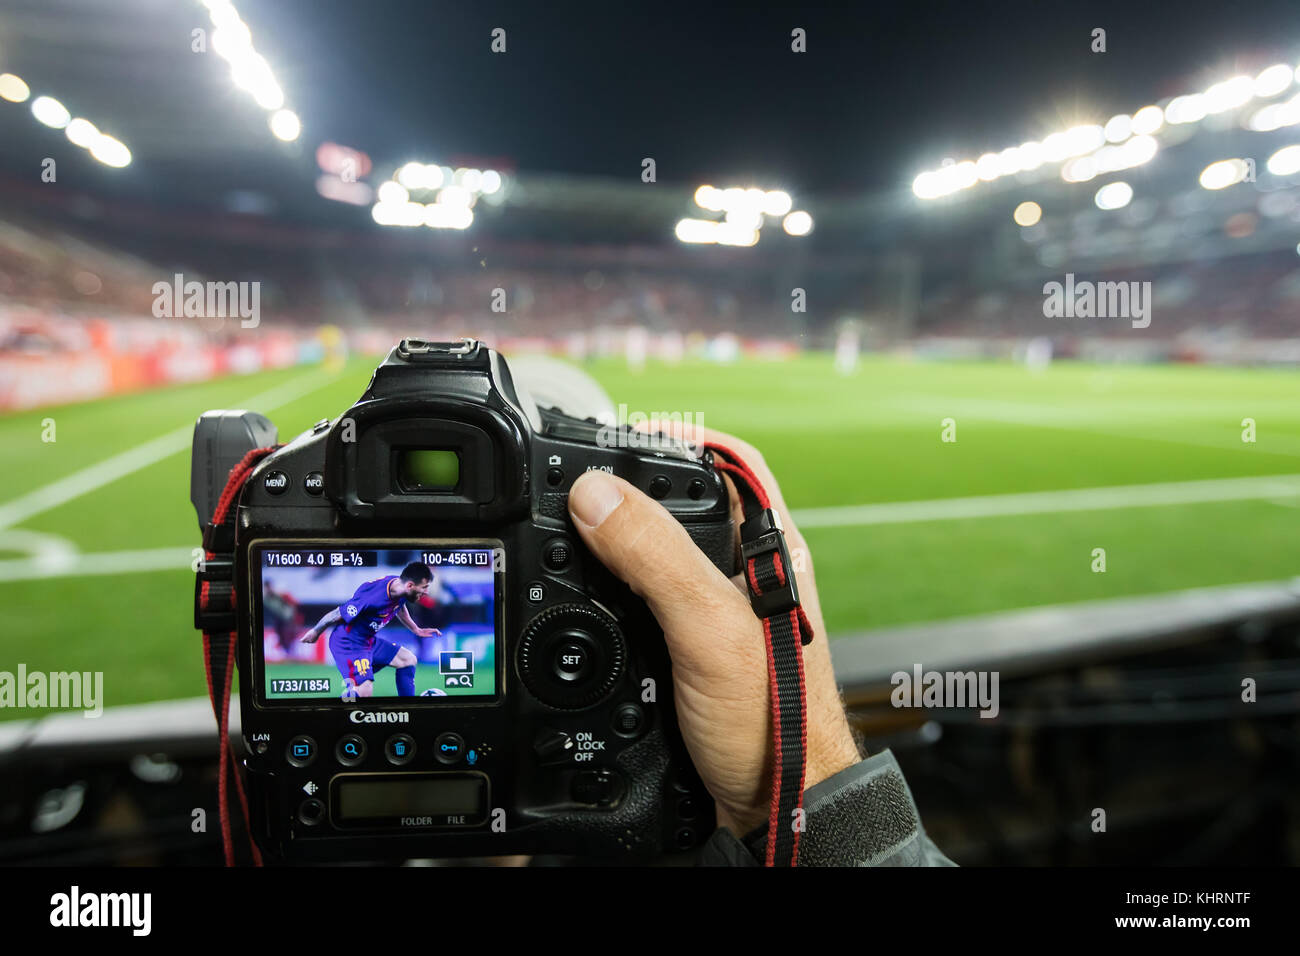 Piraeus, Greece - Oct 31, 2017: hands holding a camera while on display are  Lionel Messi during the UEFA Champions League game between Olympiacos vs F  Stock Photo - Alamy